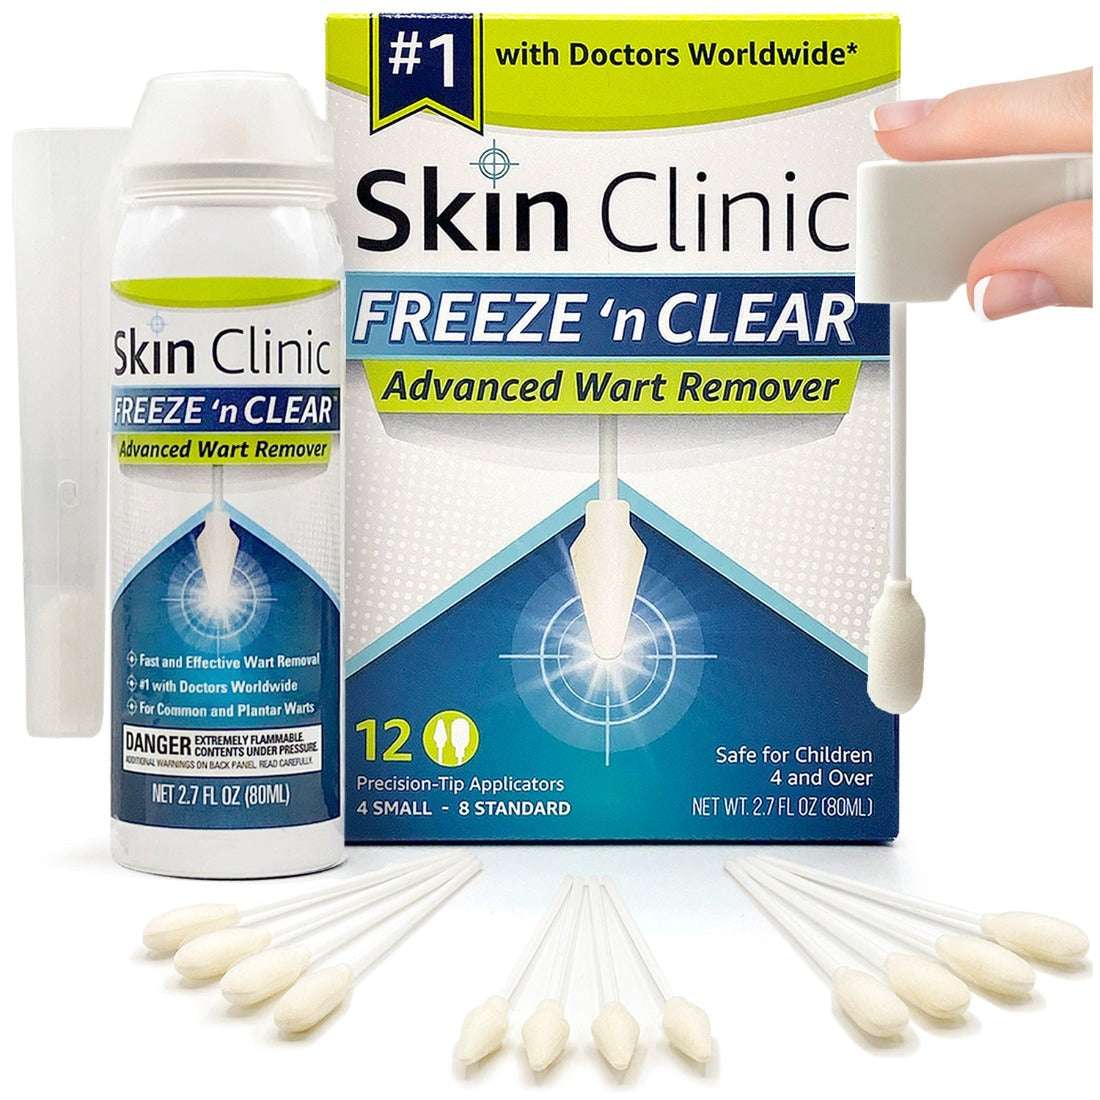 Skin Clinic FREEZE ‘n CLEAR™ Advanced Wart Remover